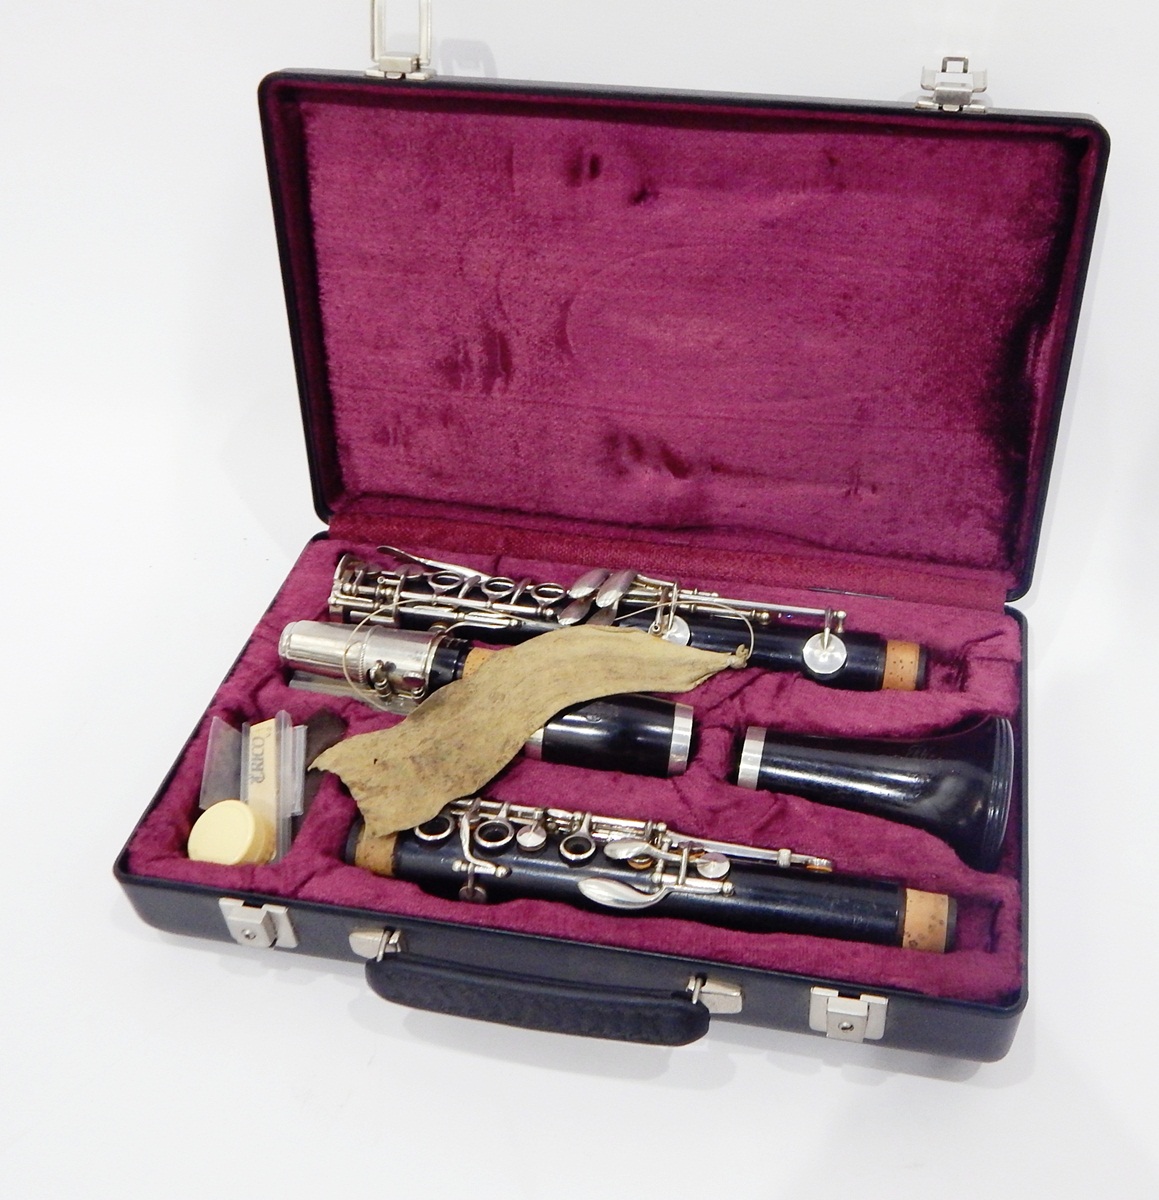 Boosey & Hawkes "Symphony 1010" wooden clarinet, no.